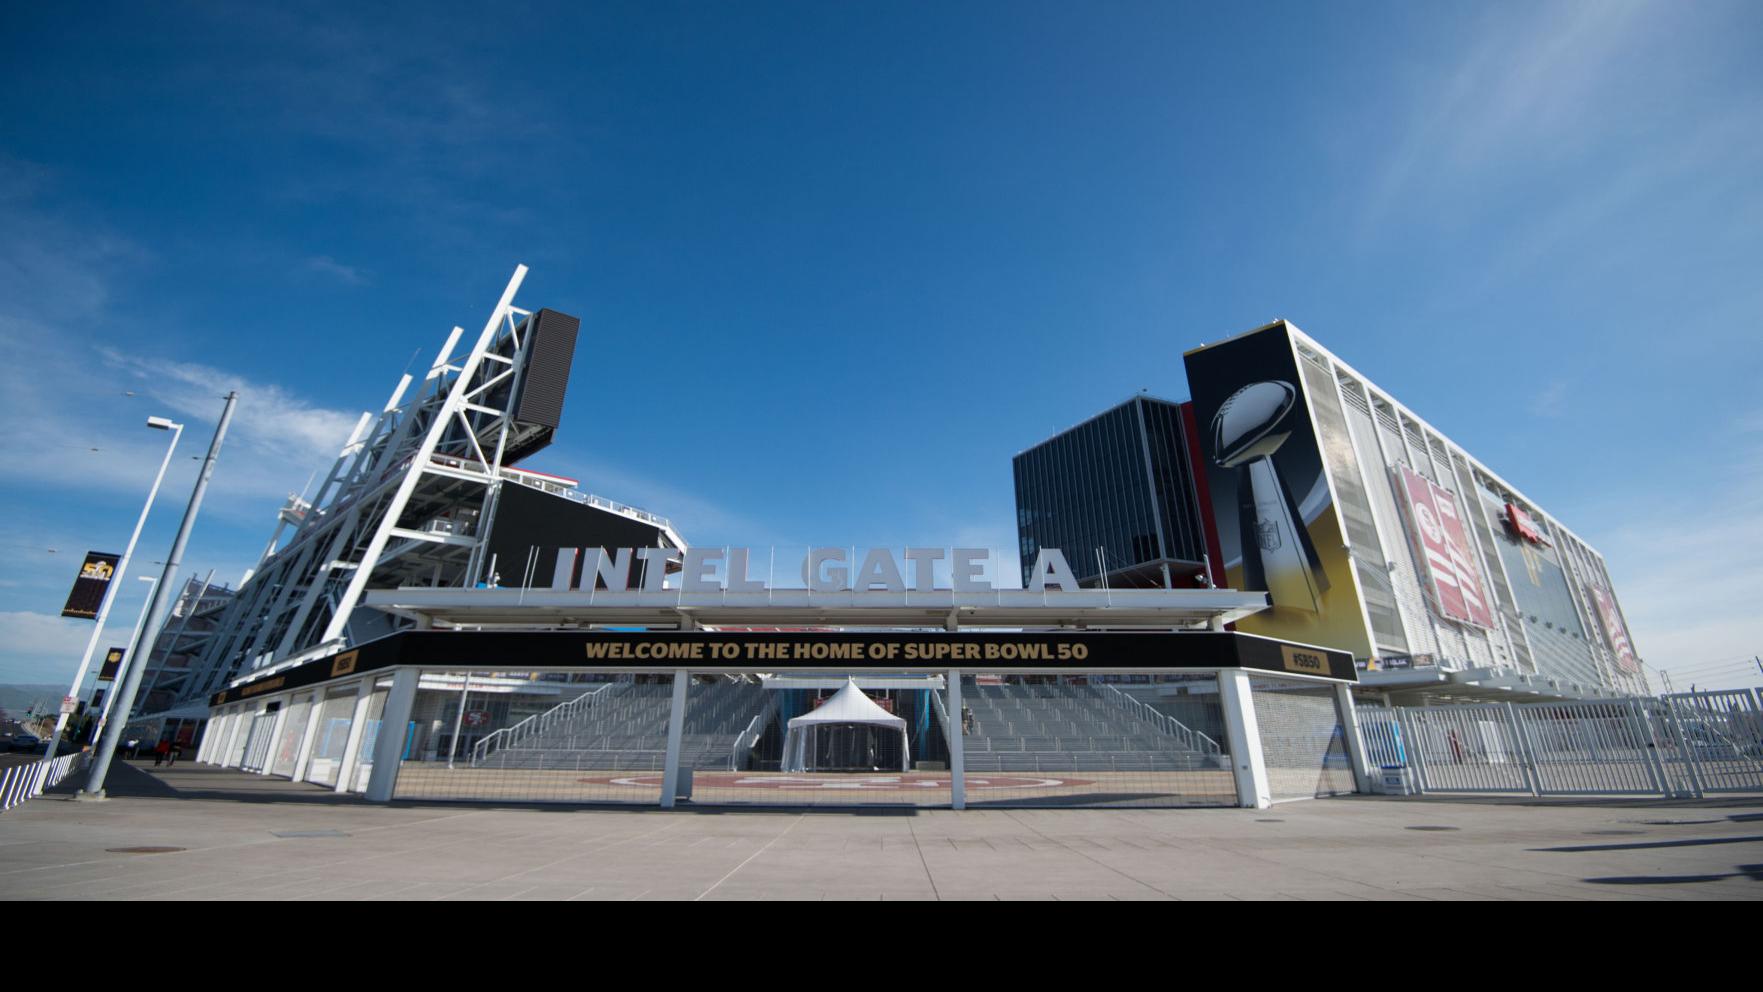 49er fans aren't thrilled with the stadium that's hosting Super Bowl 50 |  News 